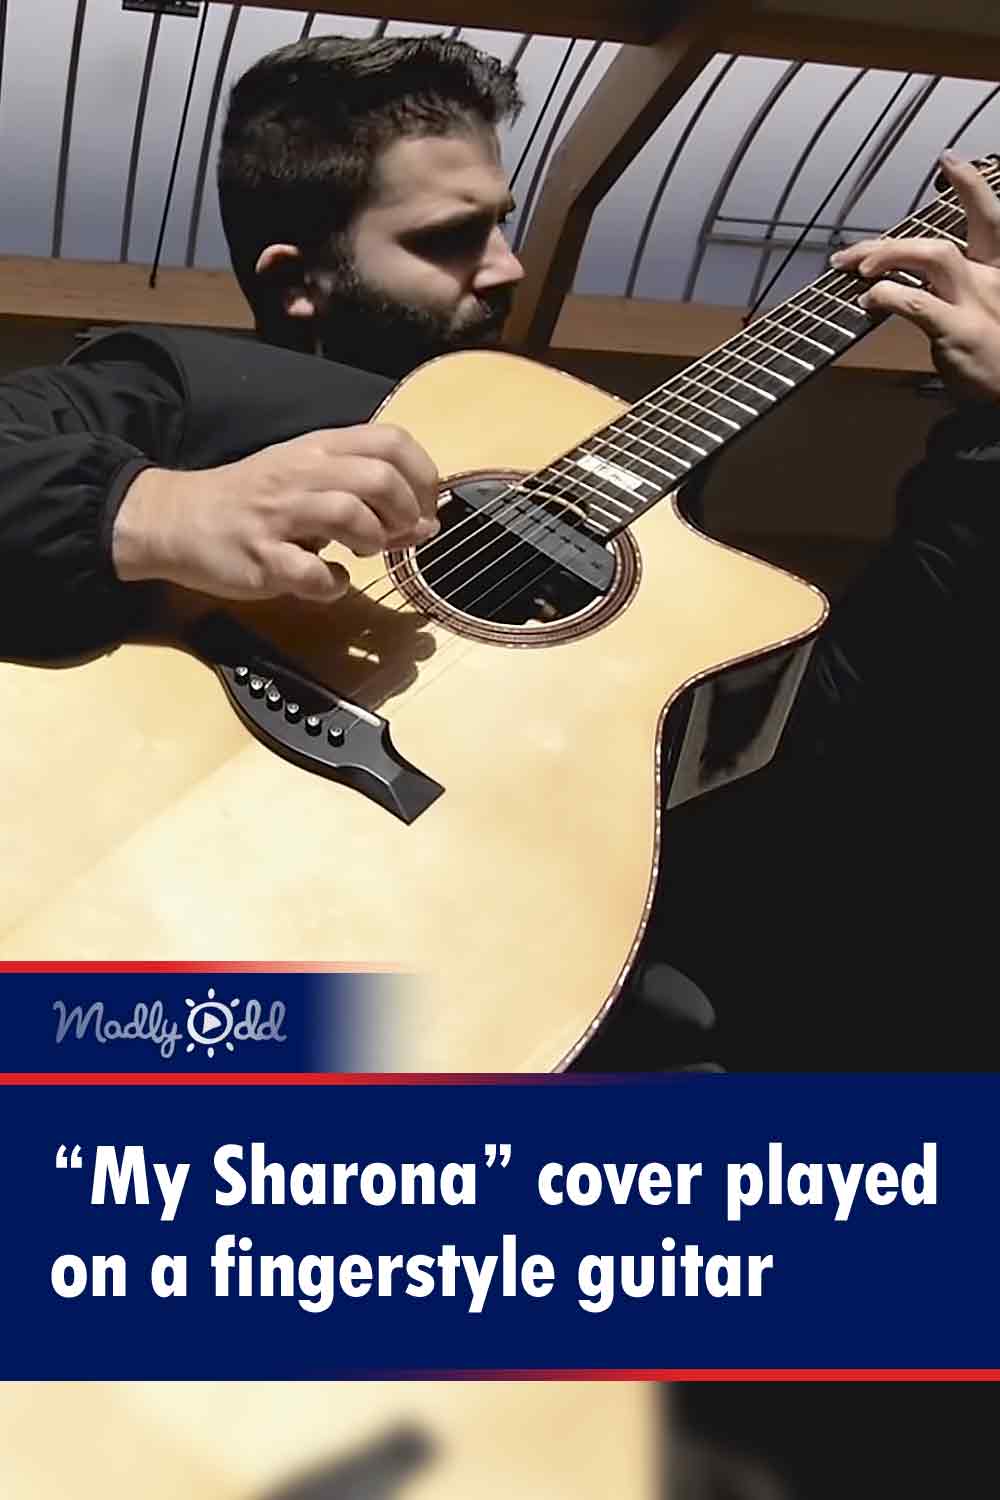 “My Sharona” cover played on a fingerstyle guitar